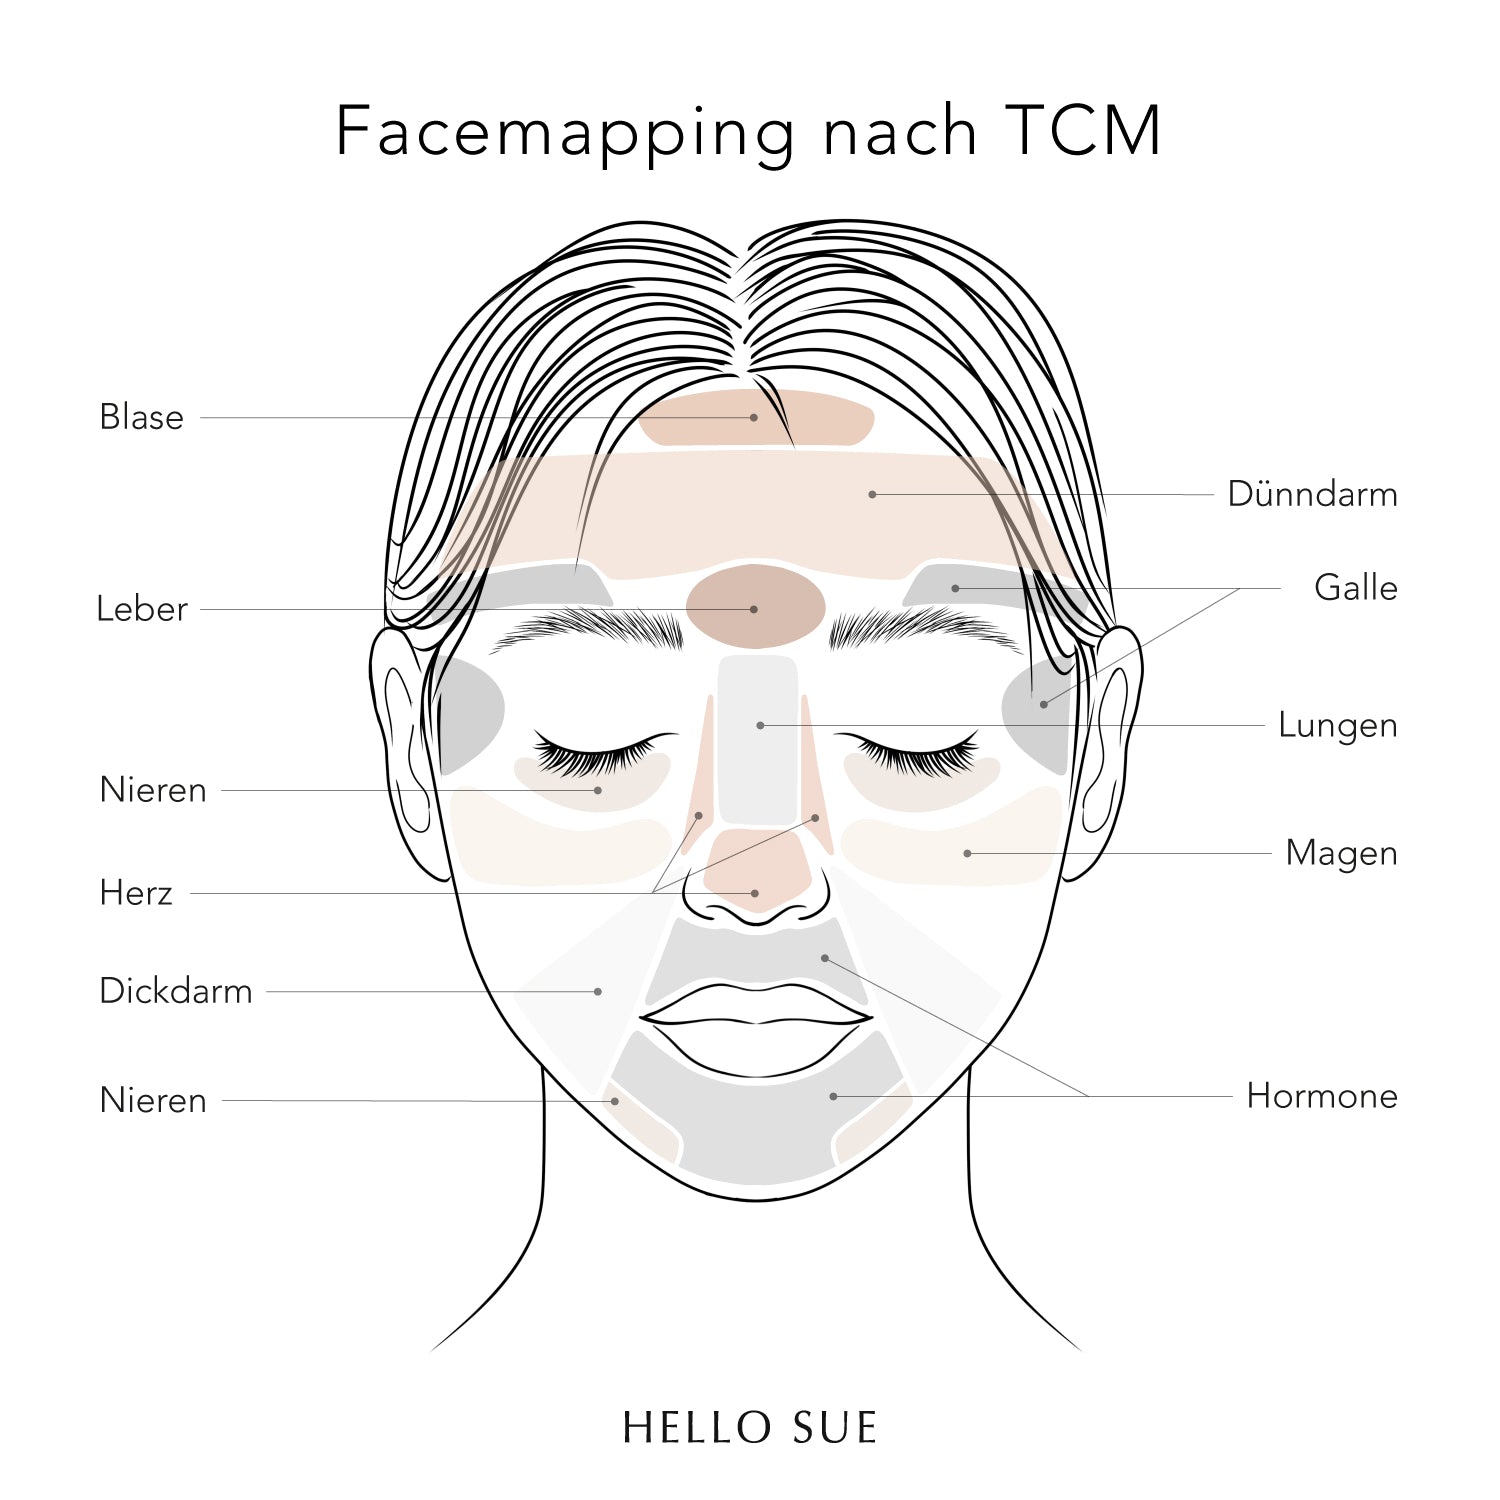 Facemapping nach TCM